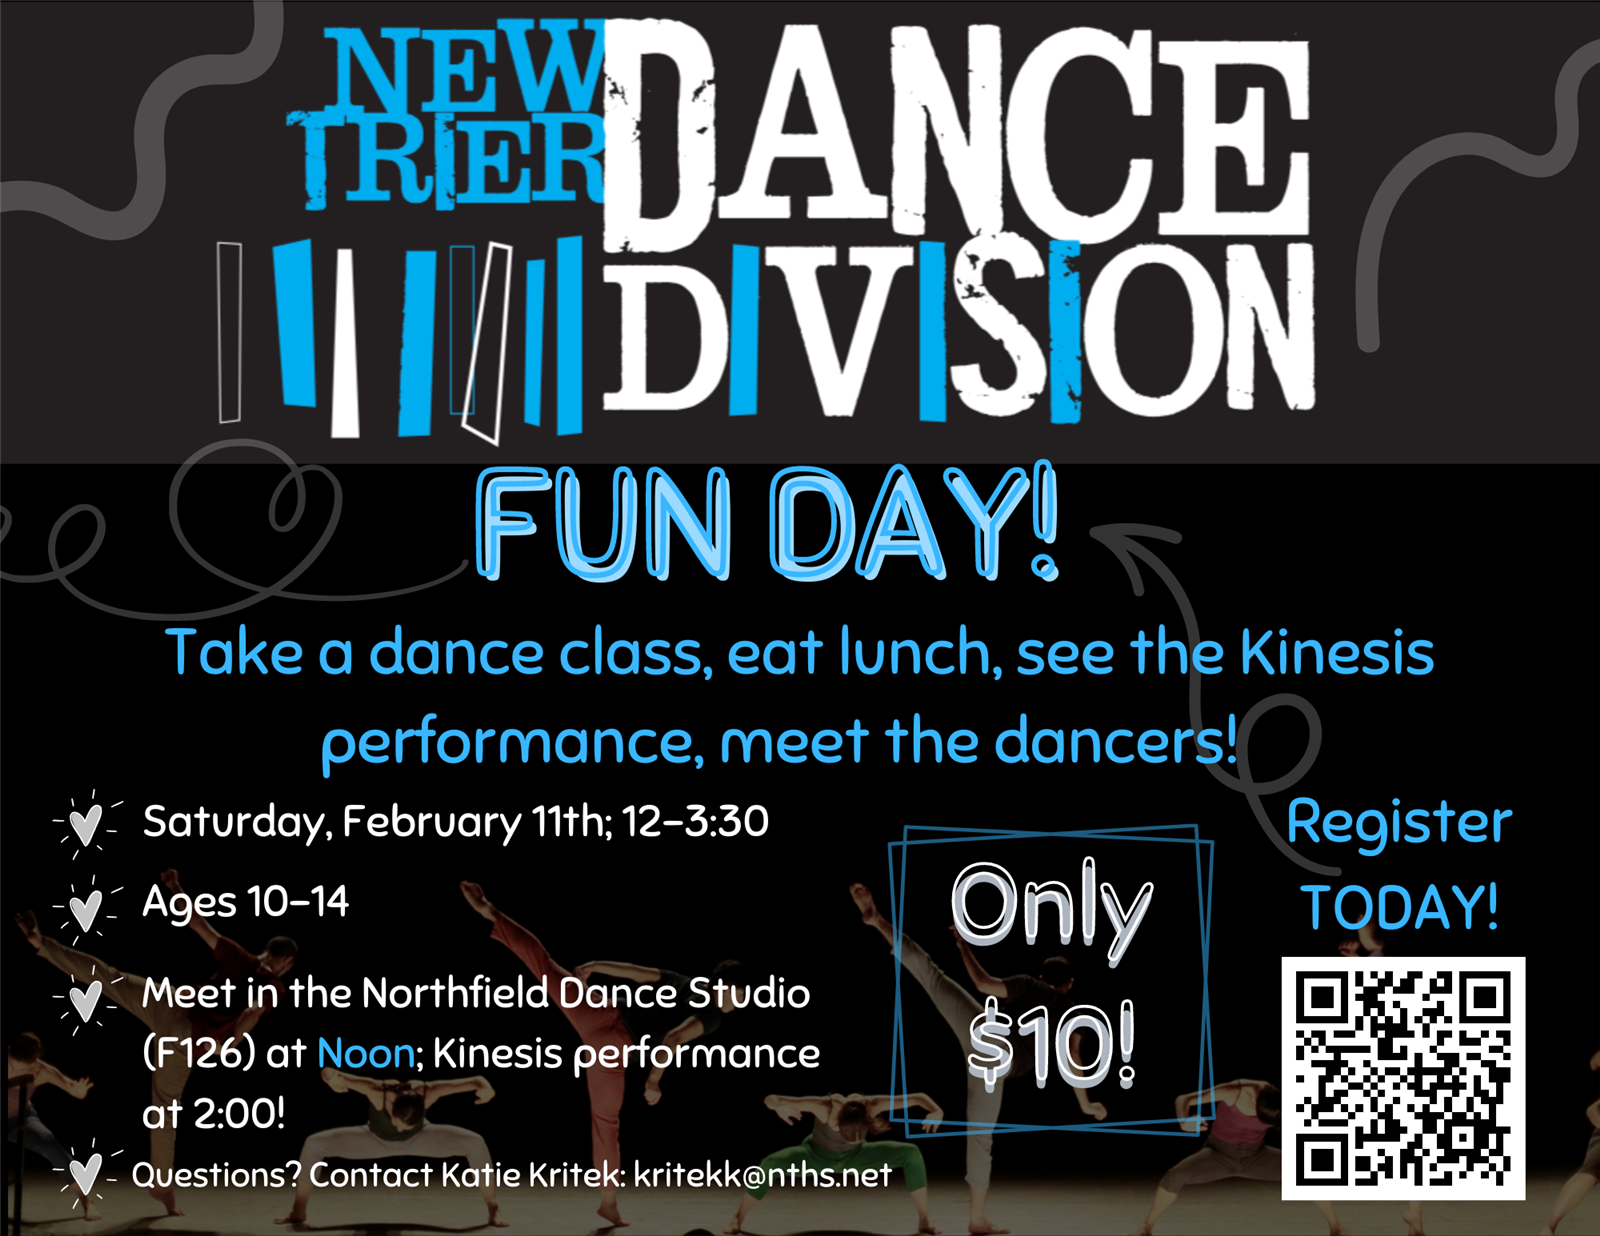 The Dance Division FUN day flyer